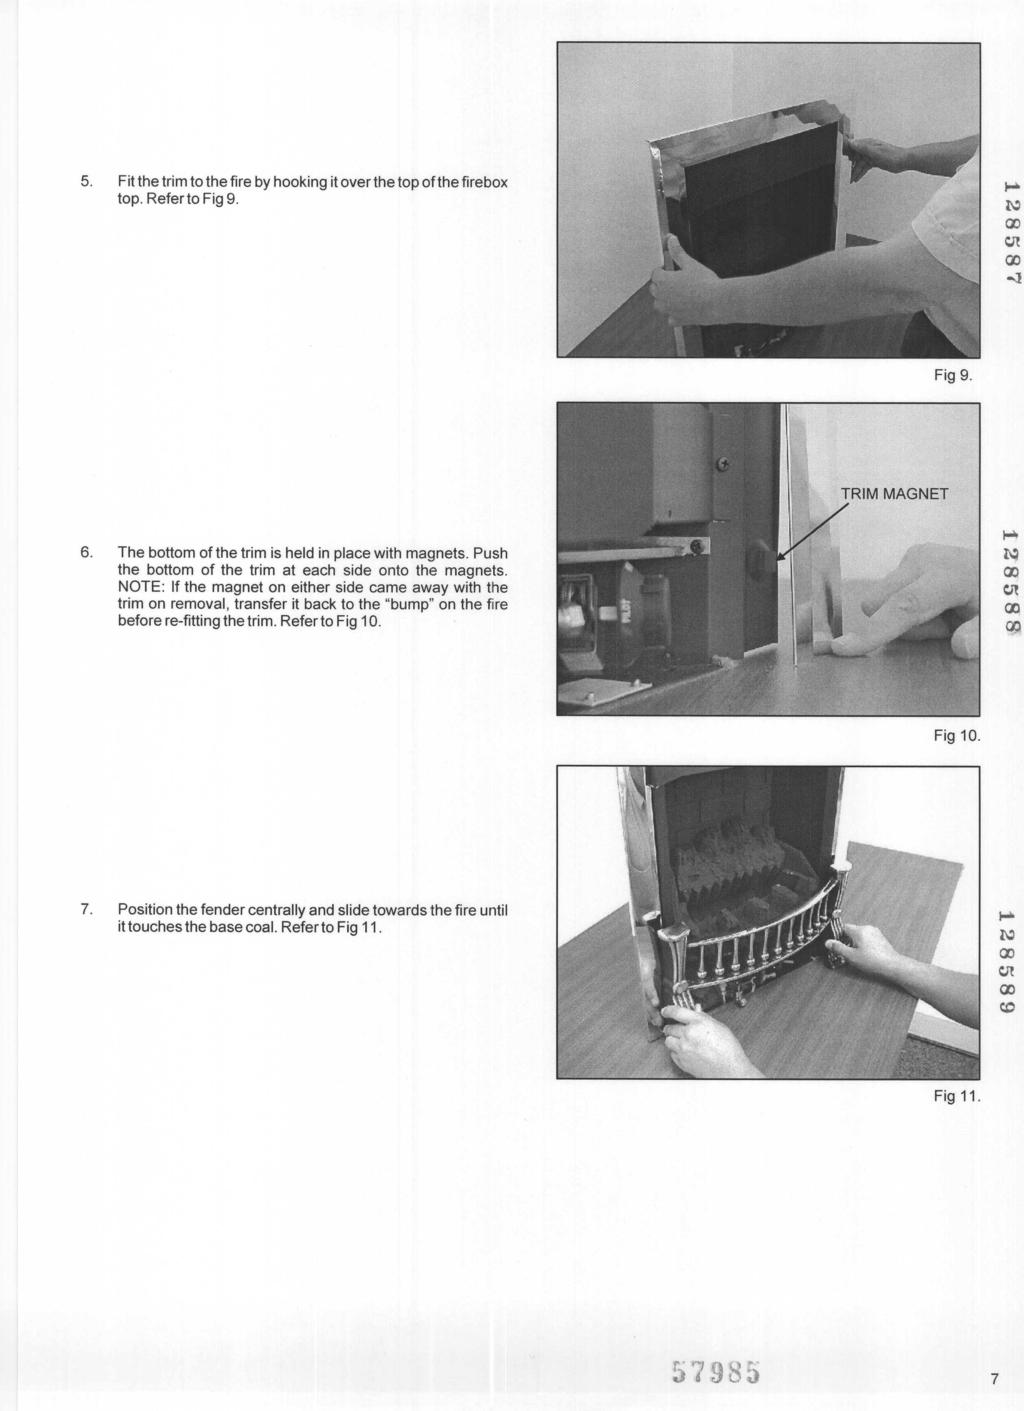 5. Fit the trim to the fire by hooking it over the top ofthe firebox top. Refer to Fig 9. 6. The bottom of the trim is held in place with magnets.